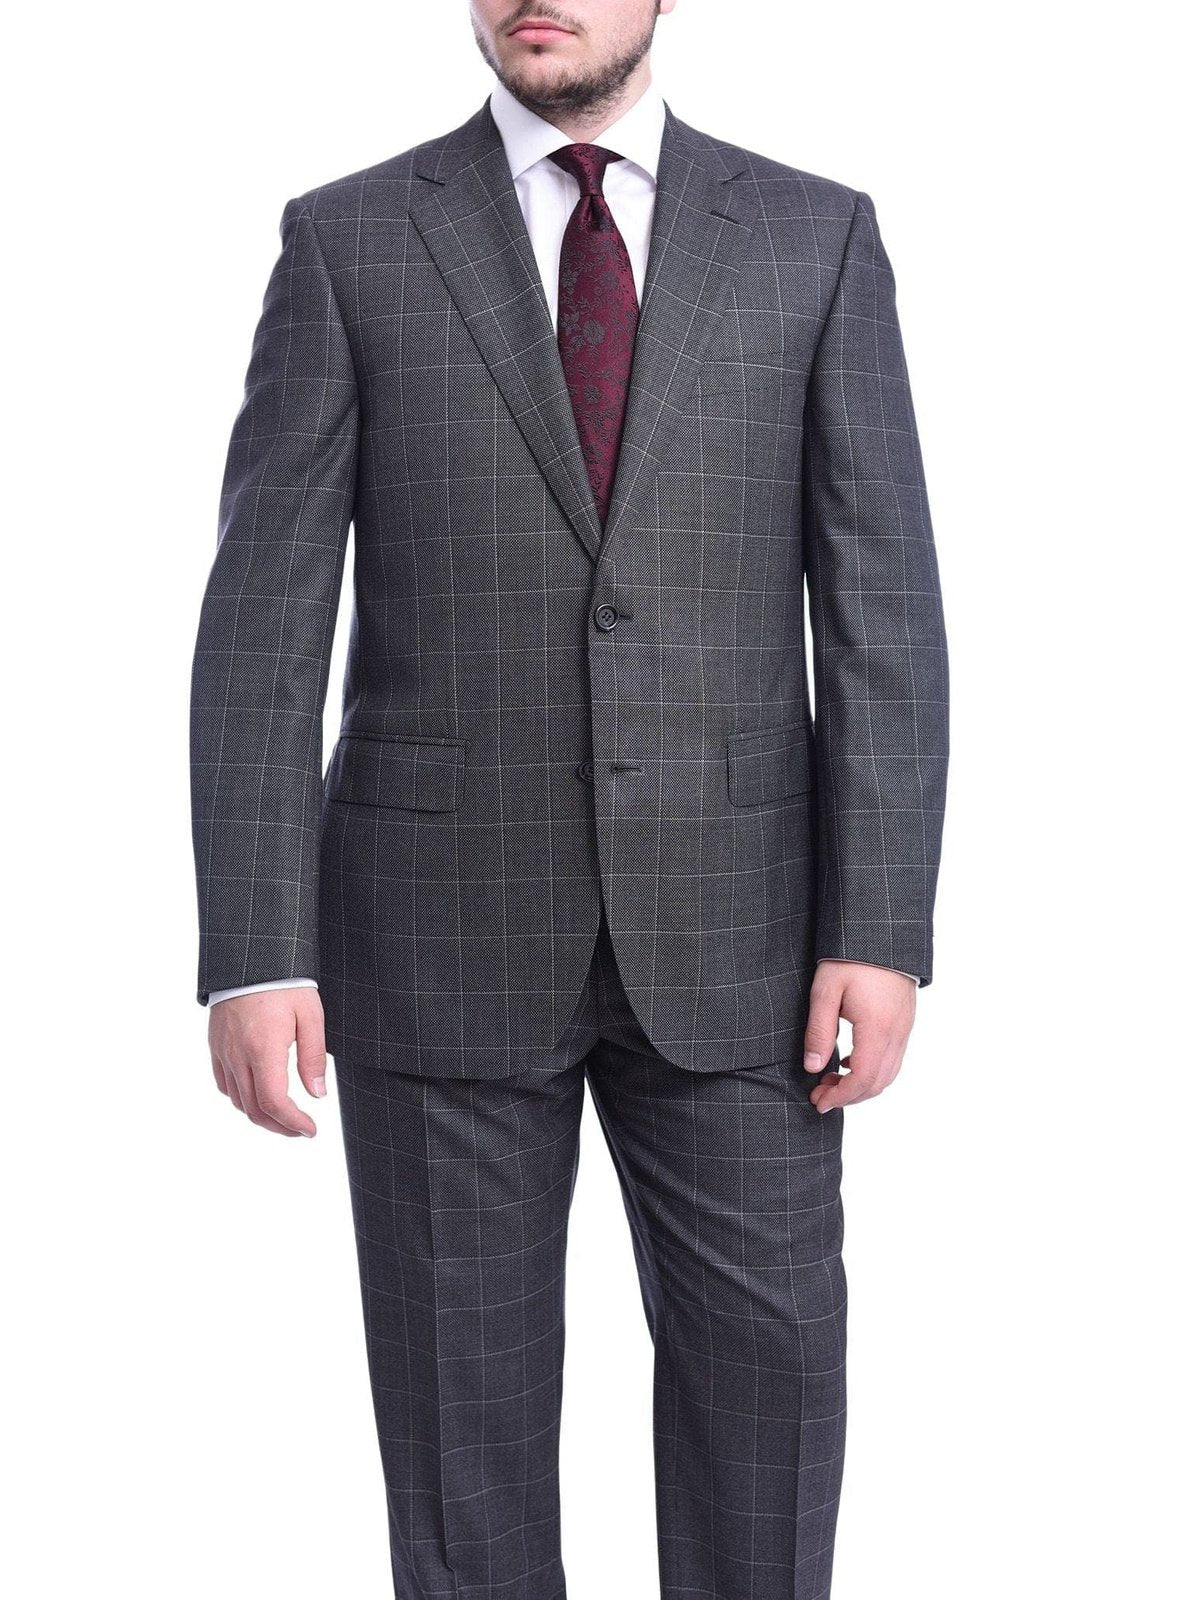 Napoli TWO PIECE SUITS Men's Napoli Classic Fit Charcoal Gray Plaid Two Button Half Canvassed Wool Suit